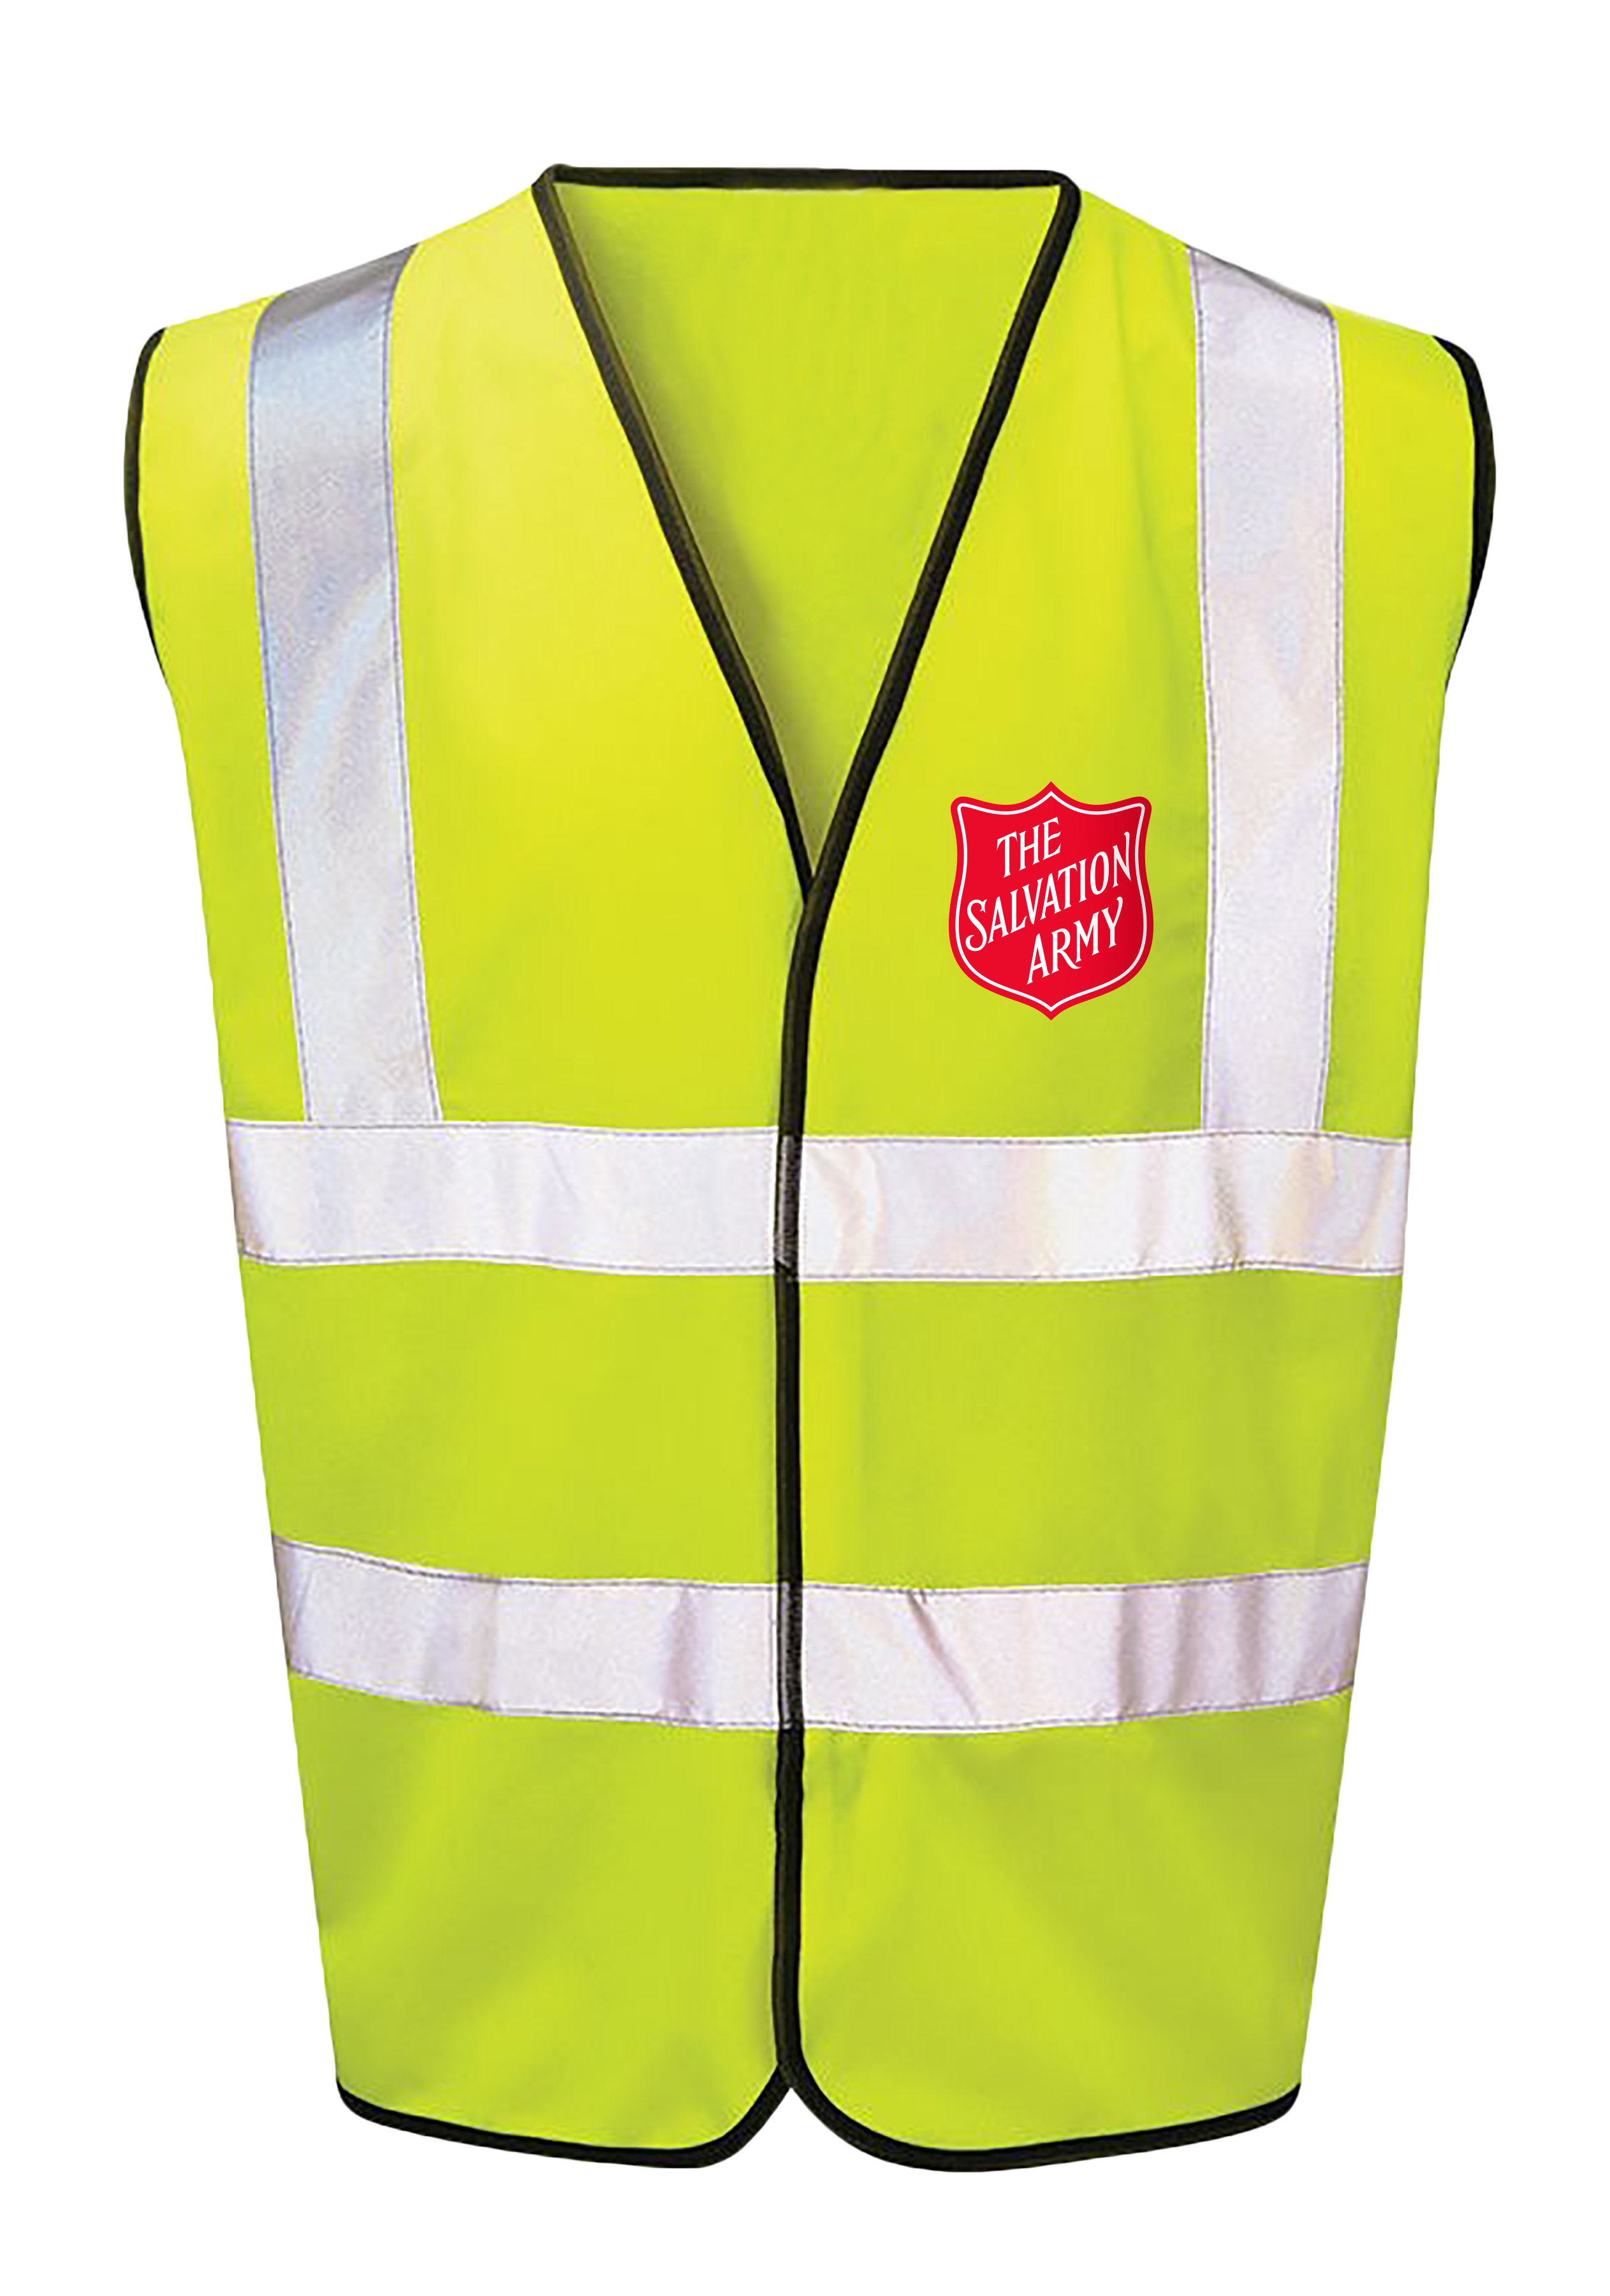 Yellow Hi-Vis Waistcoat with Red Shield